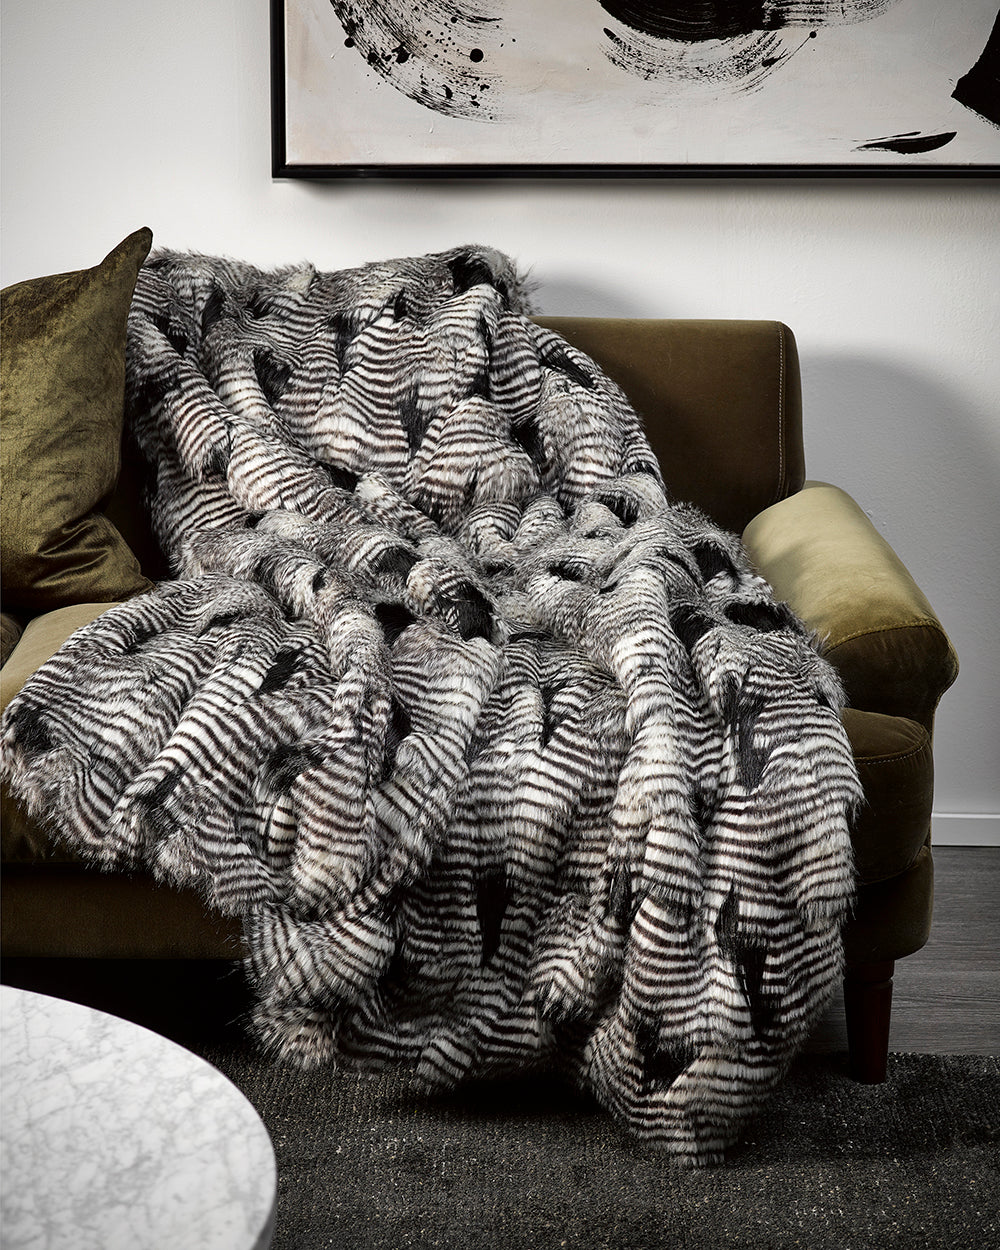 Heirloom Silver Pheasant Throw Rug Blanket in Faux Fur is available from Make Your House A Home Premium Stockist. Furniture Store Bendigo, Victoria. Australia Wide Delivery.